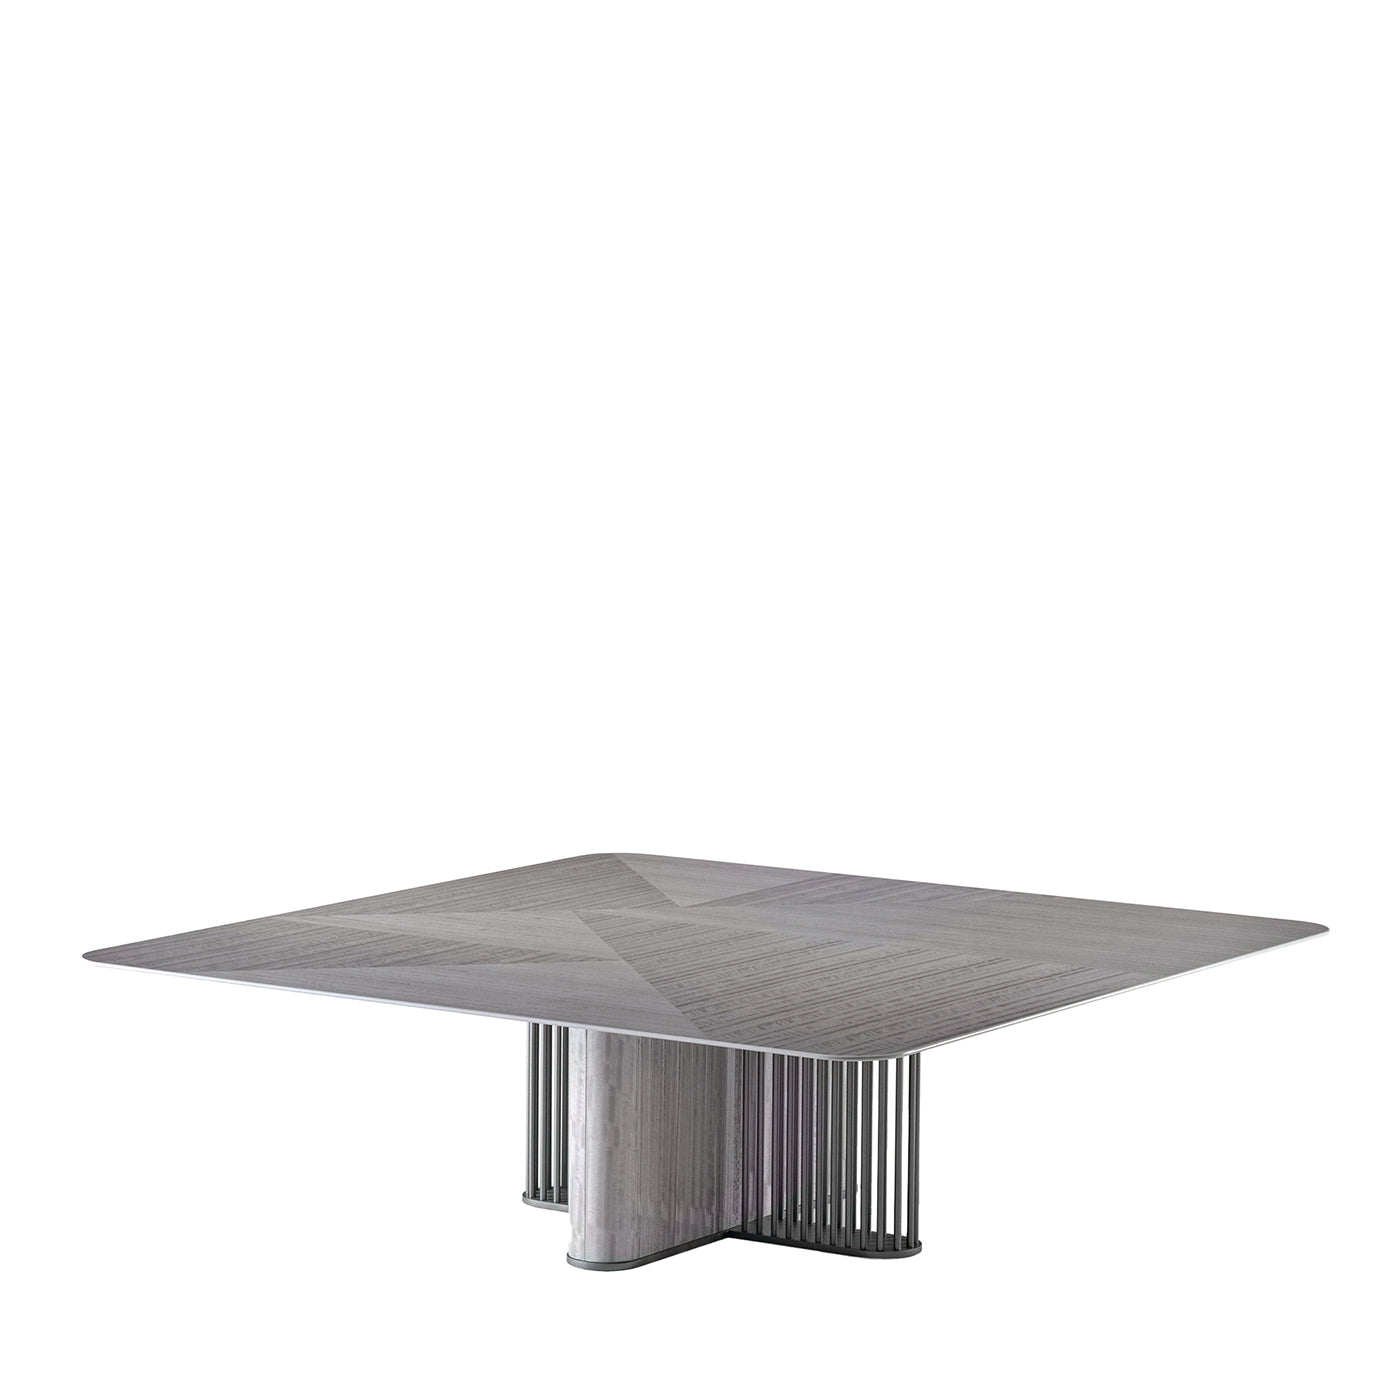 Moonlight Square Coffee Table - Main view